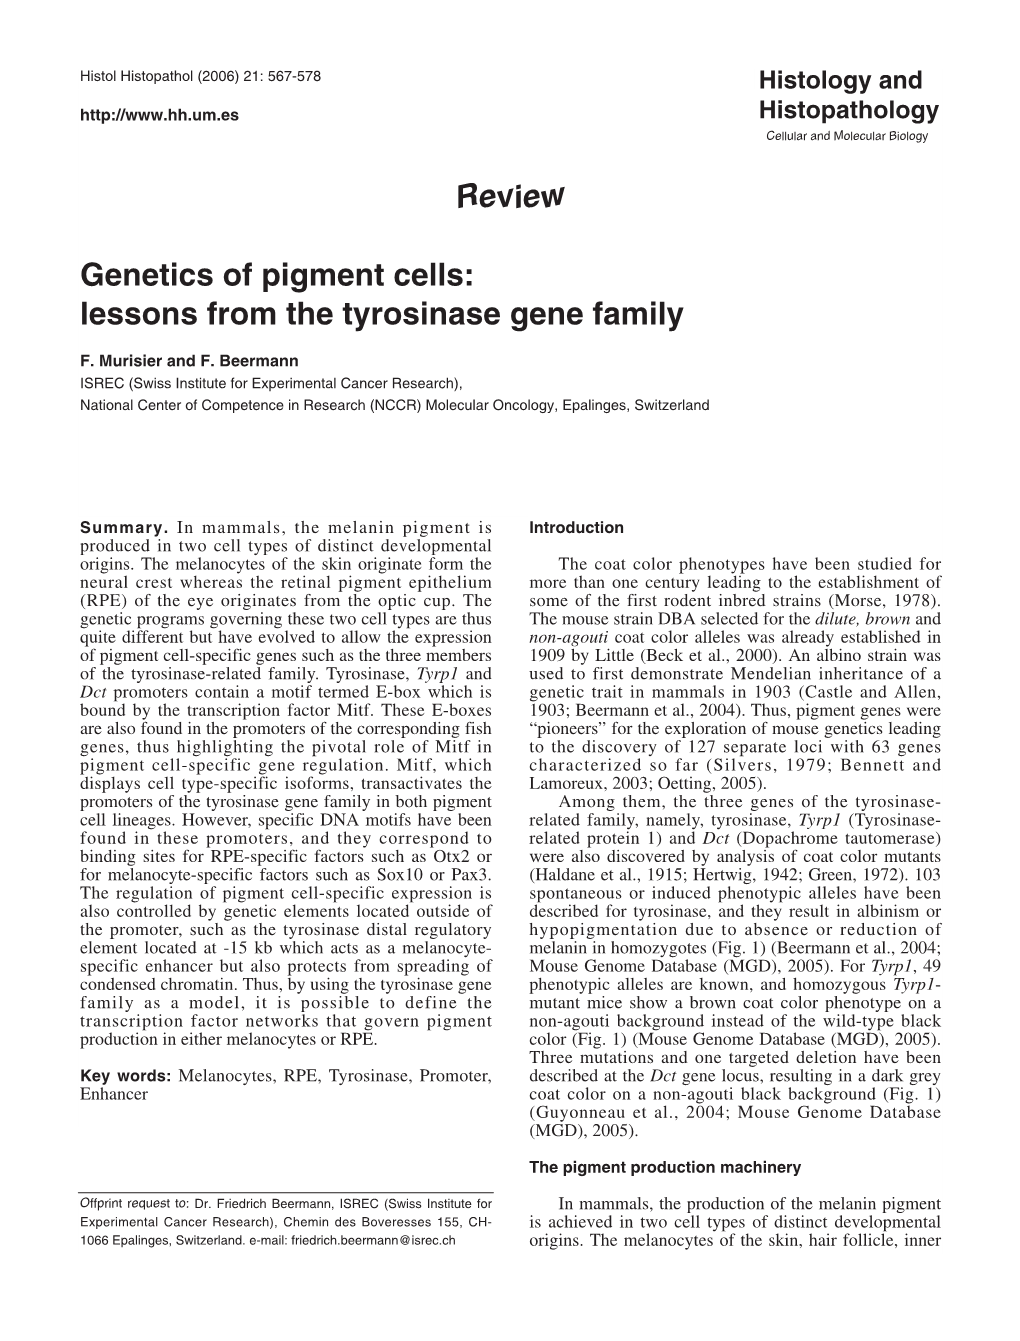 Review Genetics of Pigment Cells: Lessons from the Tyrosinase Gene